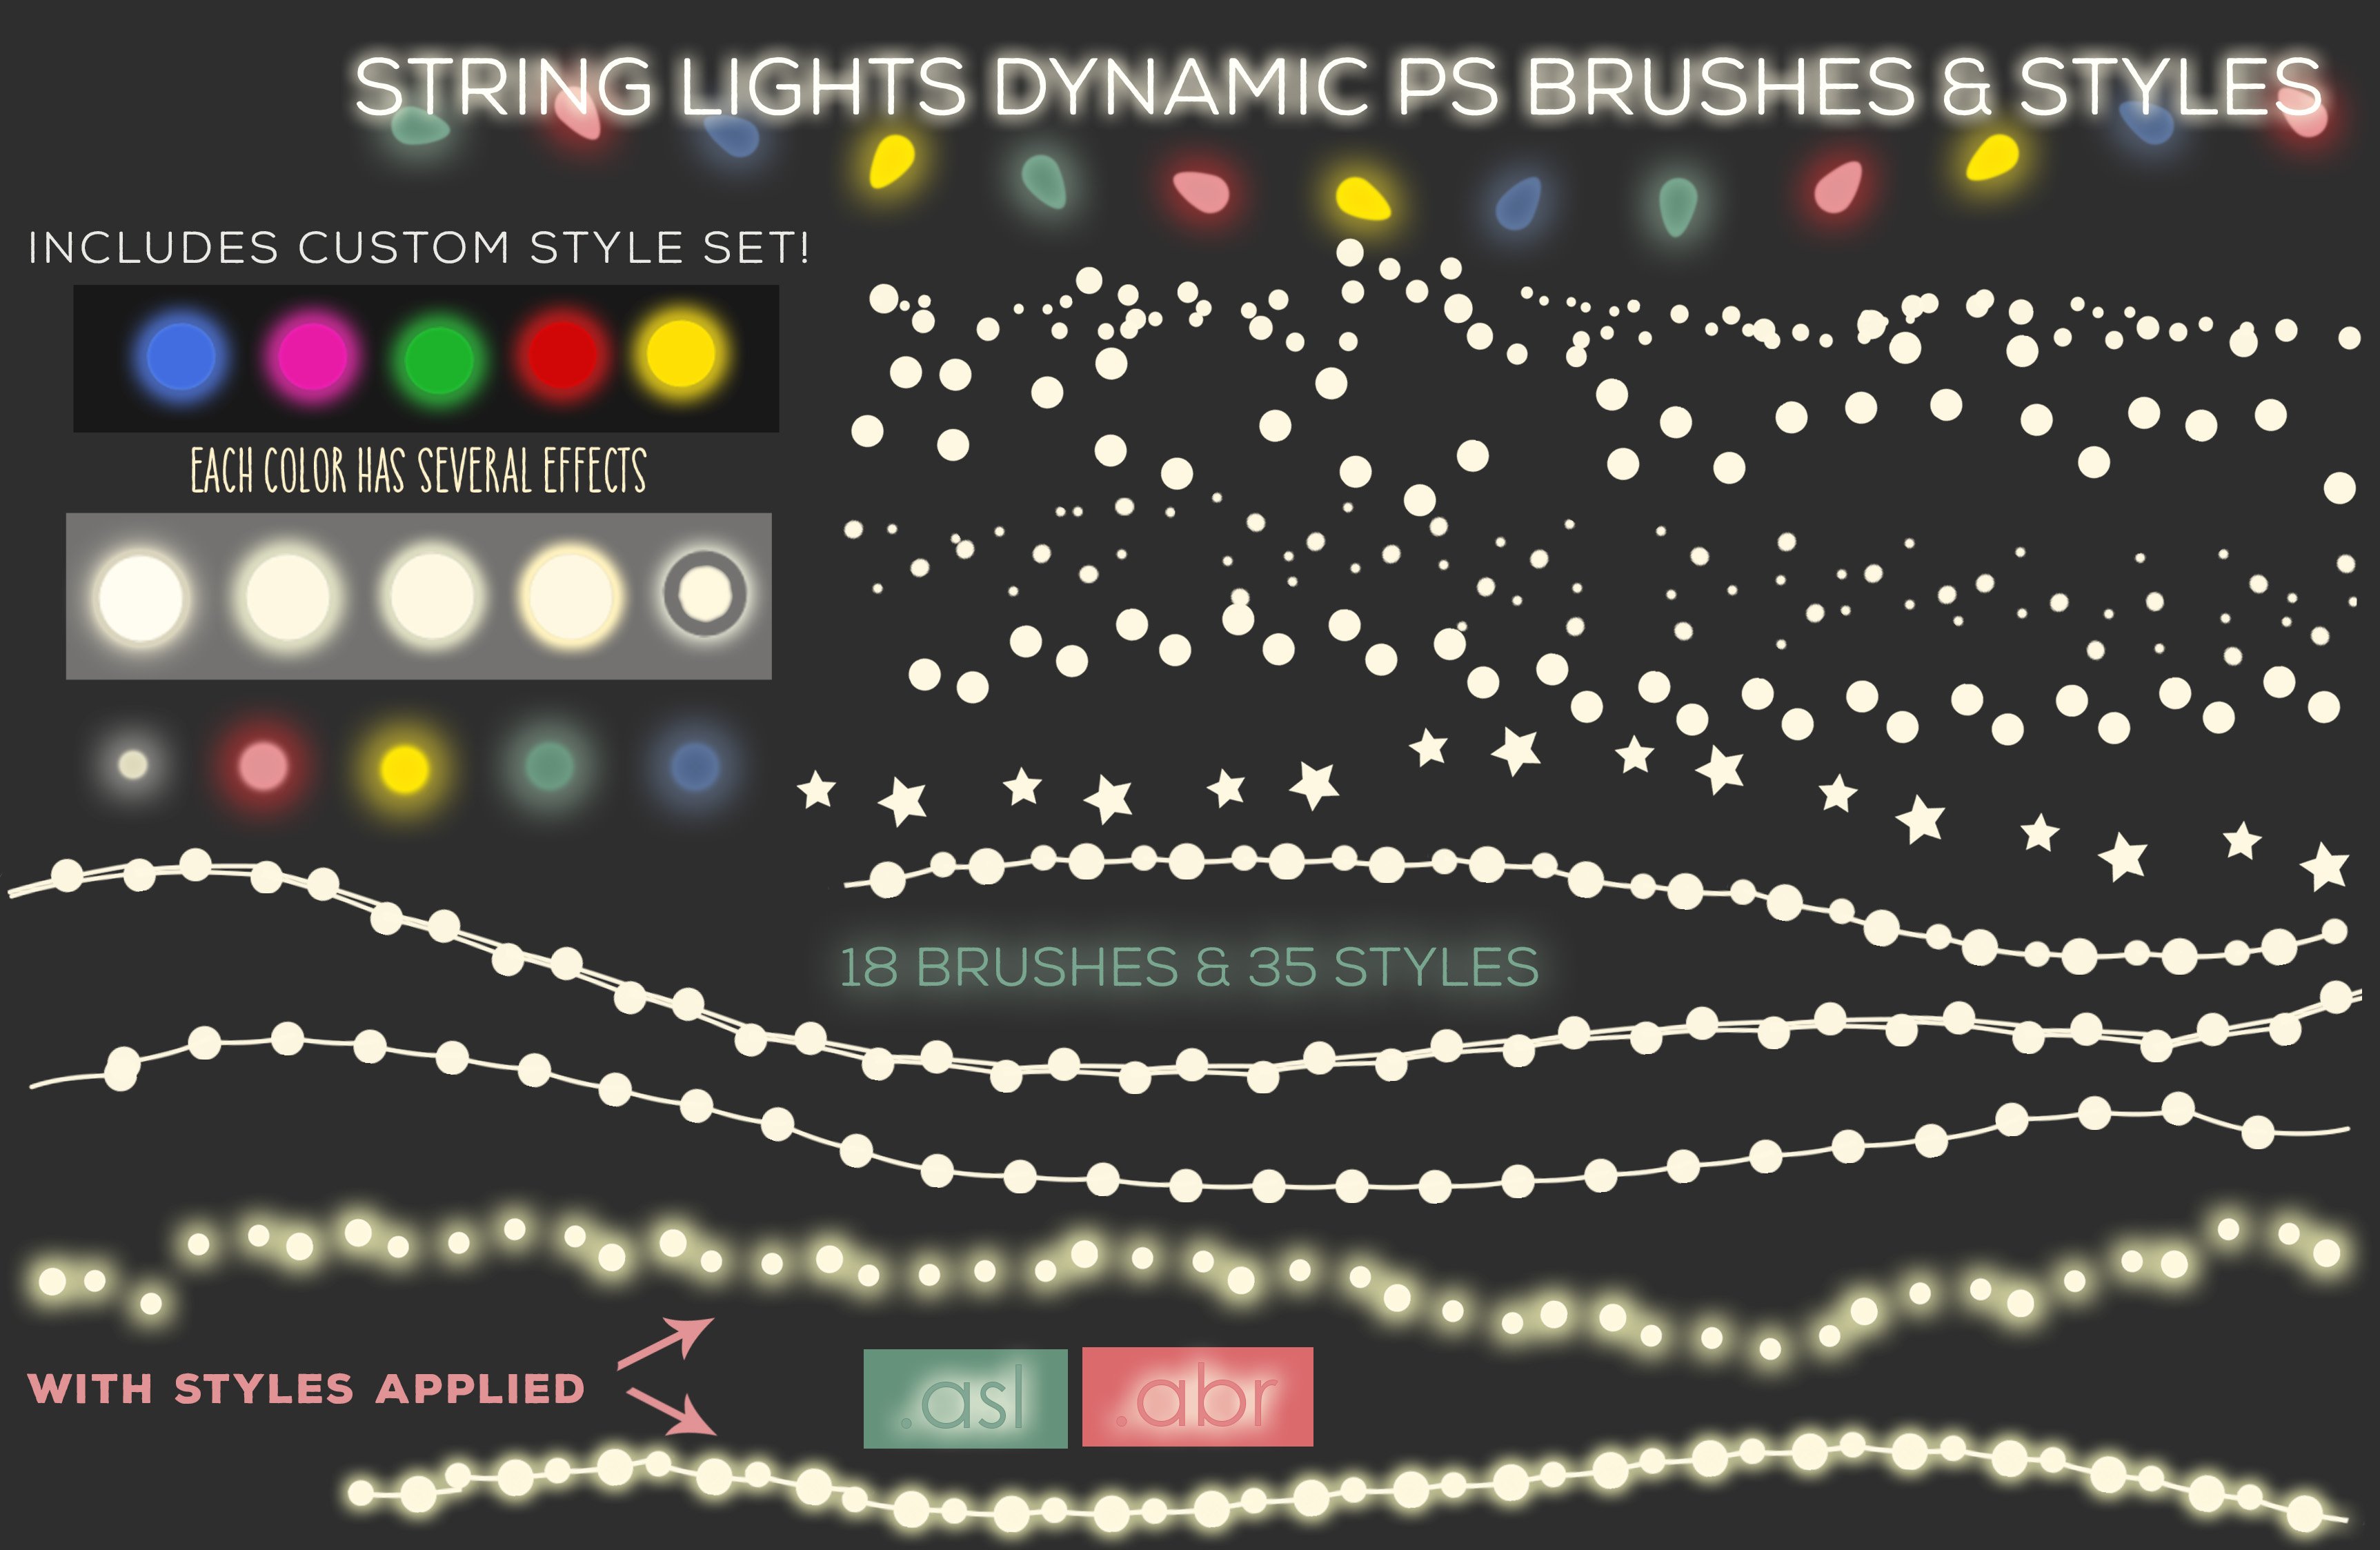 PS String Lights Brushes & Stylescover image.